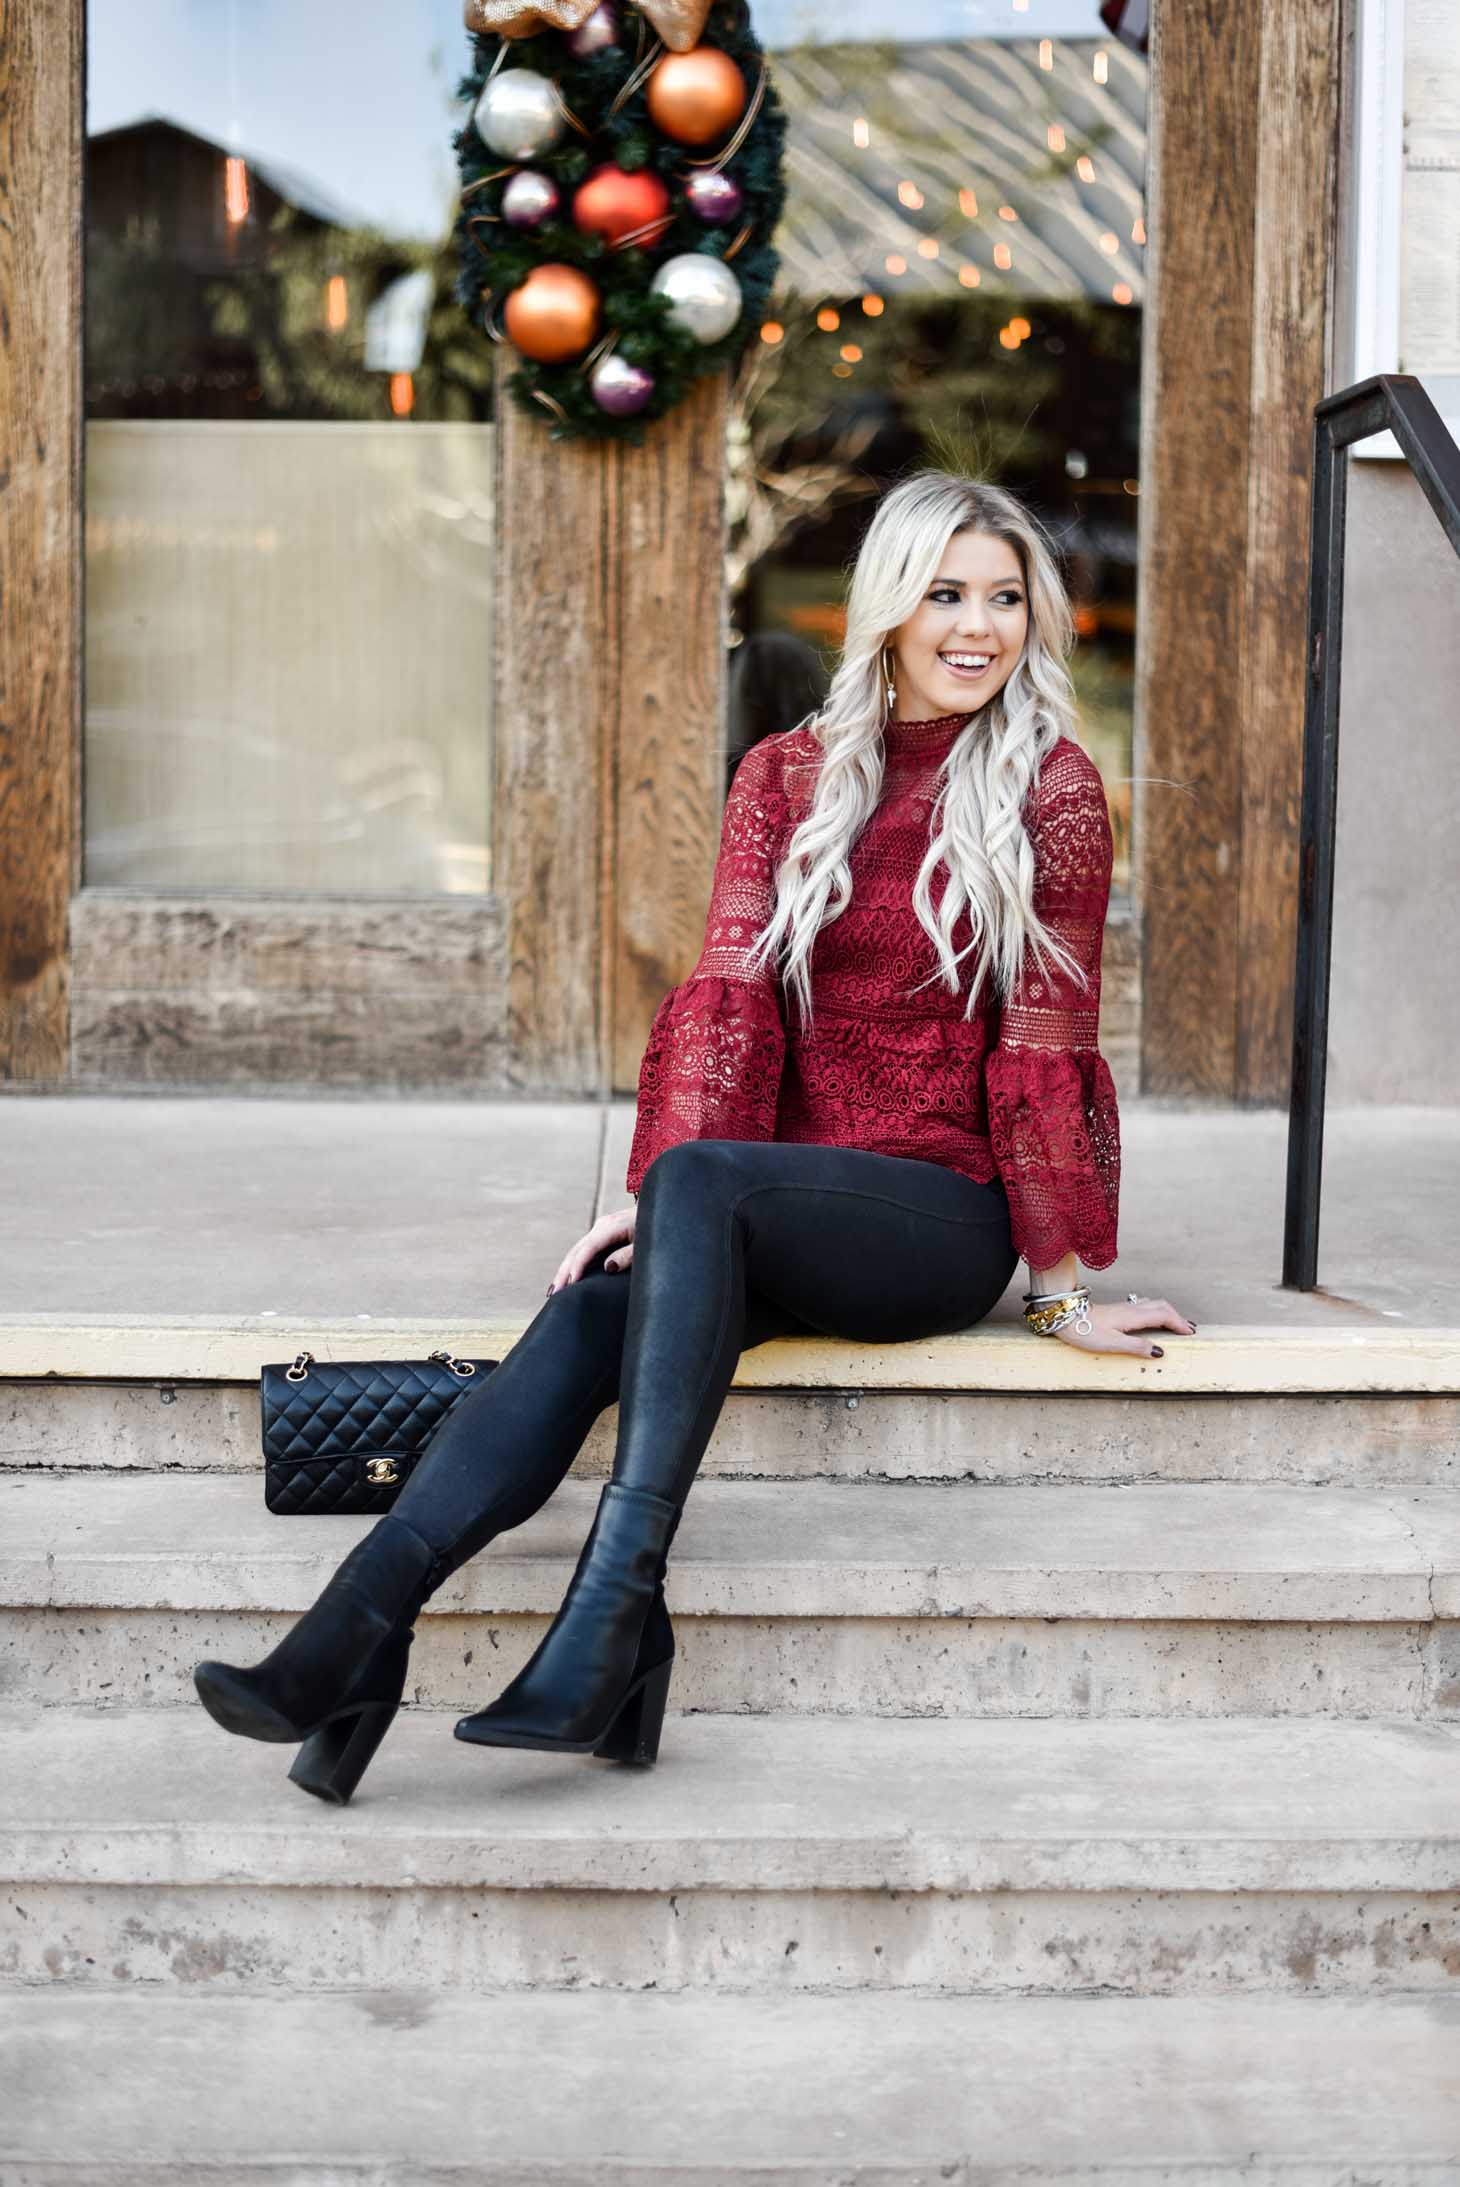 Erin Elizabeth of Wink and a Twirl shares the perfect comfortable holiday look with Spanx leggings and a fun holiday top from Chicwish